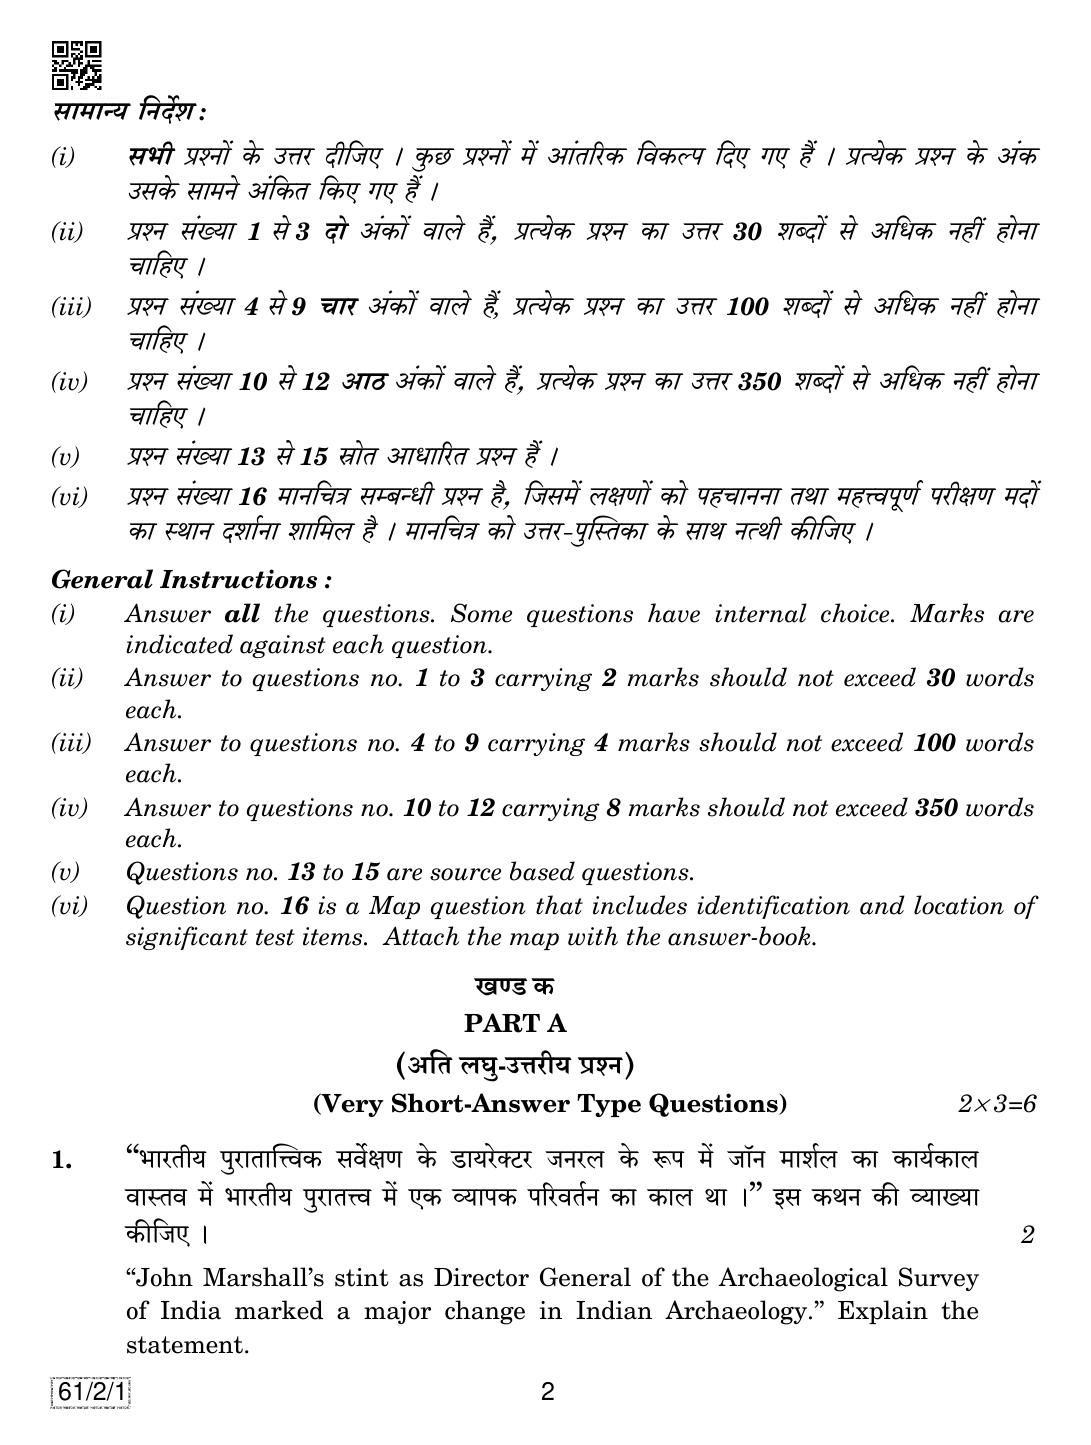 CBSE Class 12 61-2-1 History 2019 Question Paper - Page 2